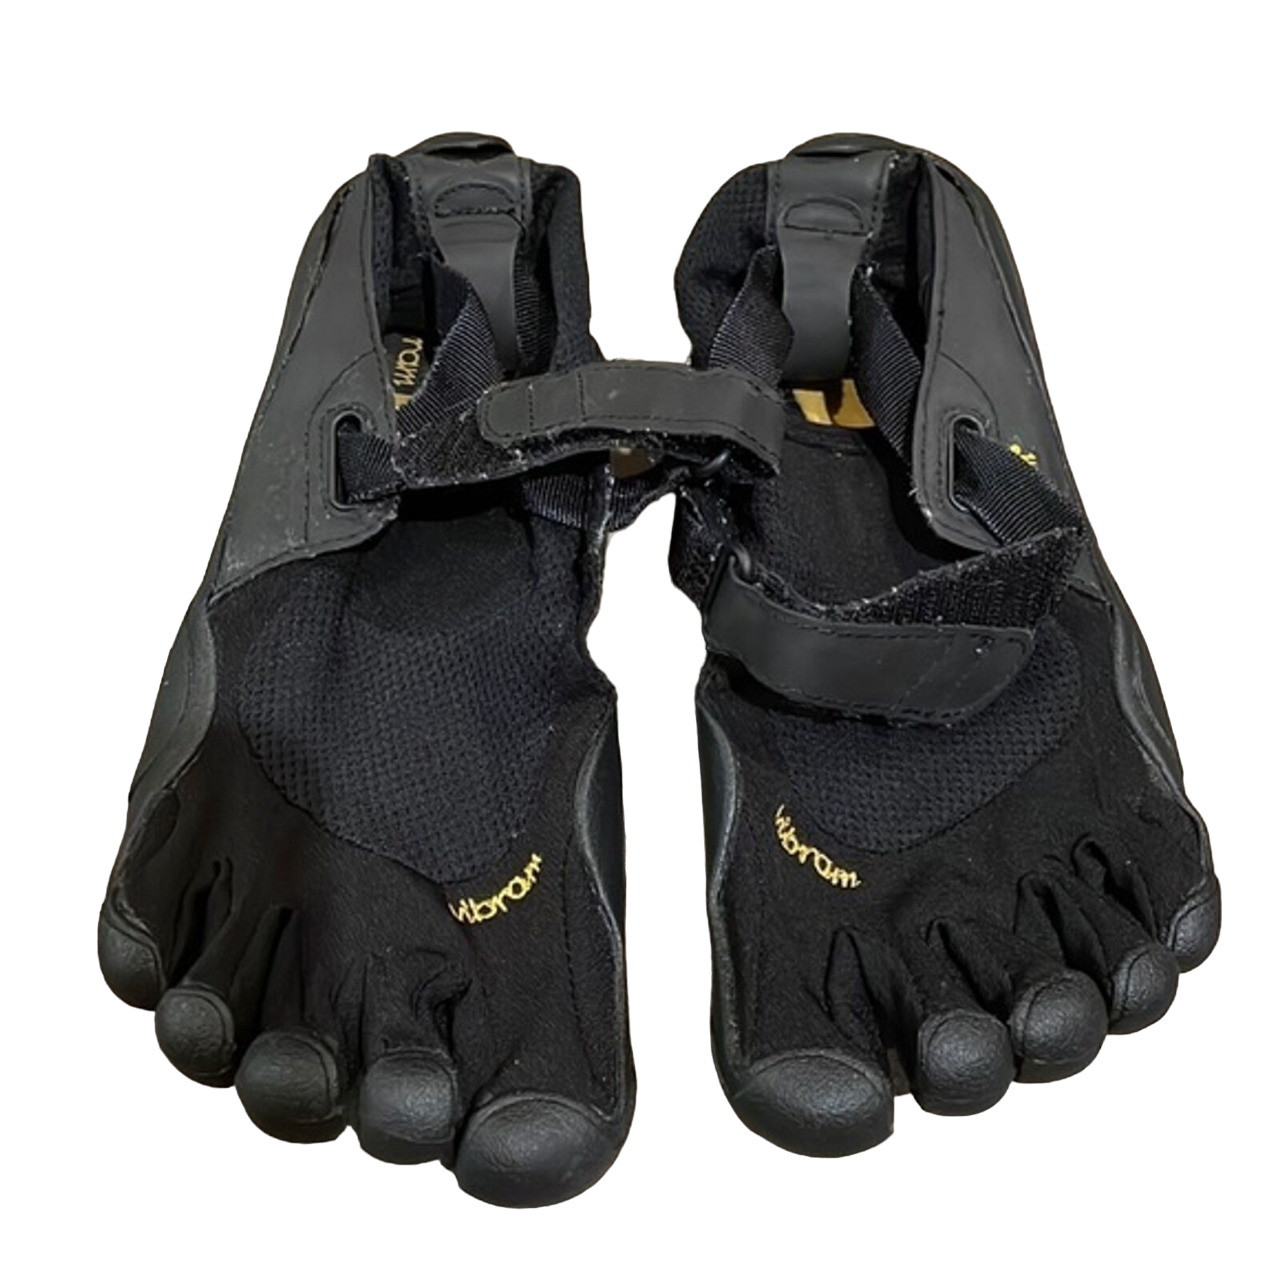 Primary image for Vibram Black Five Fingers Barefoot Shoes Womens EU 37 US 7-7.5  Running Fitness